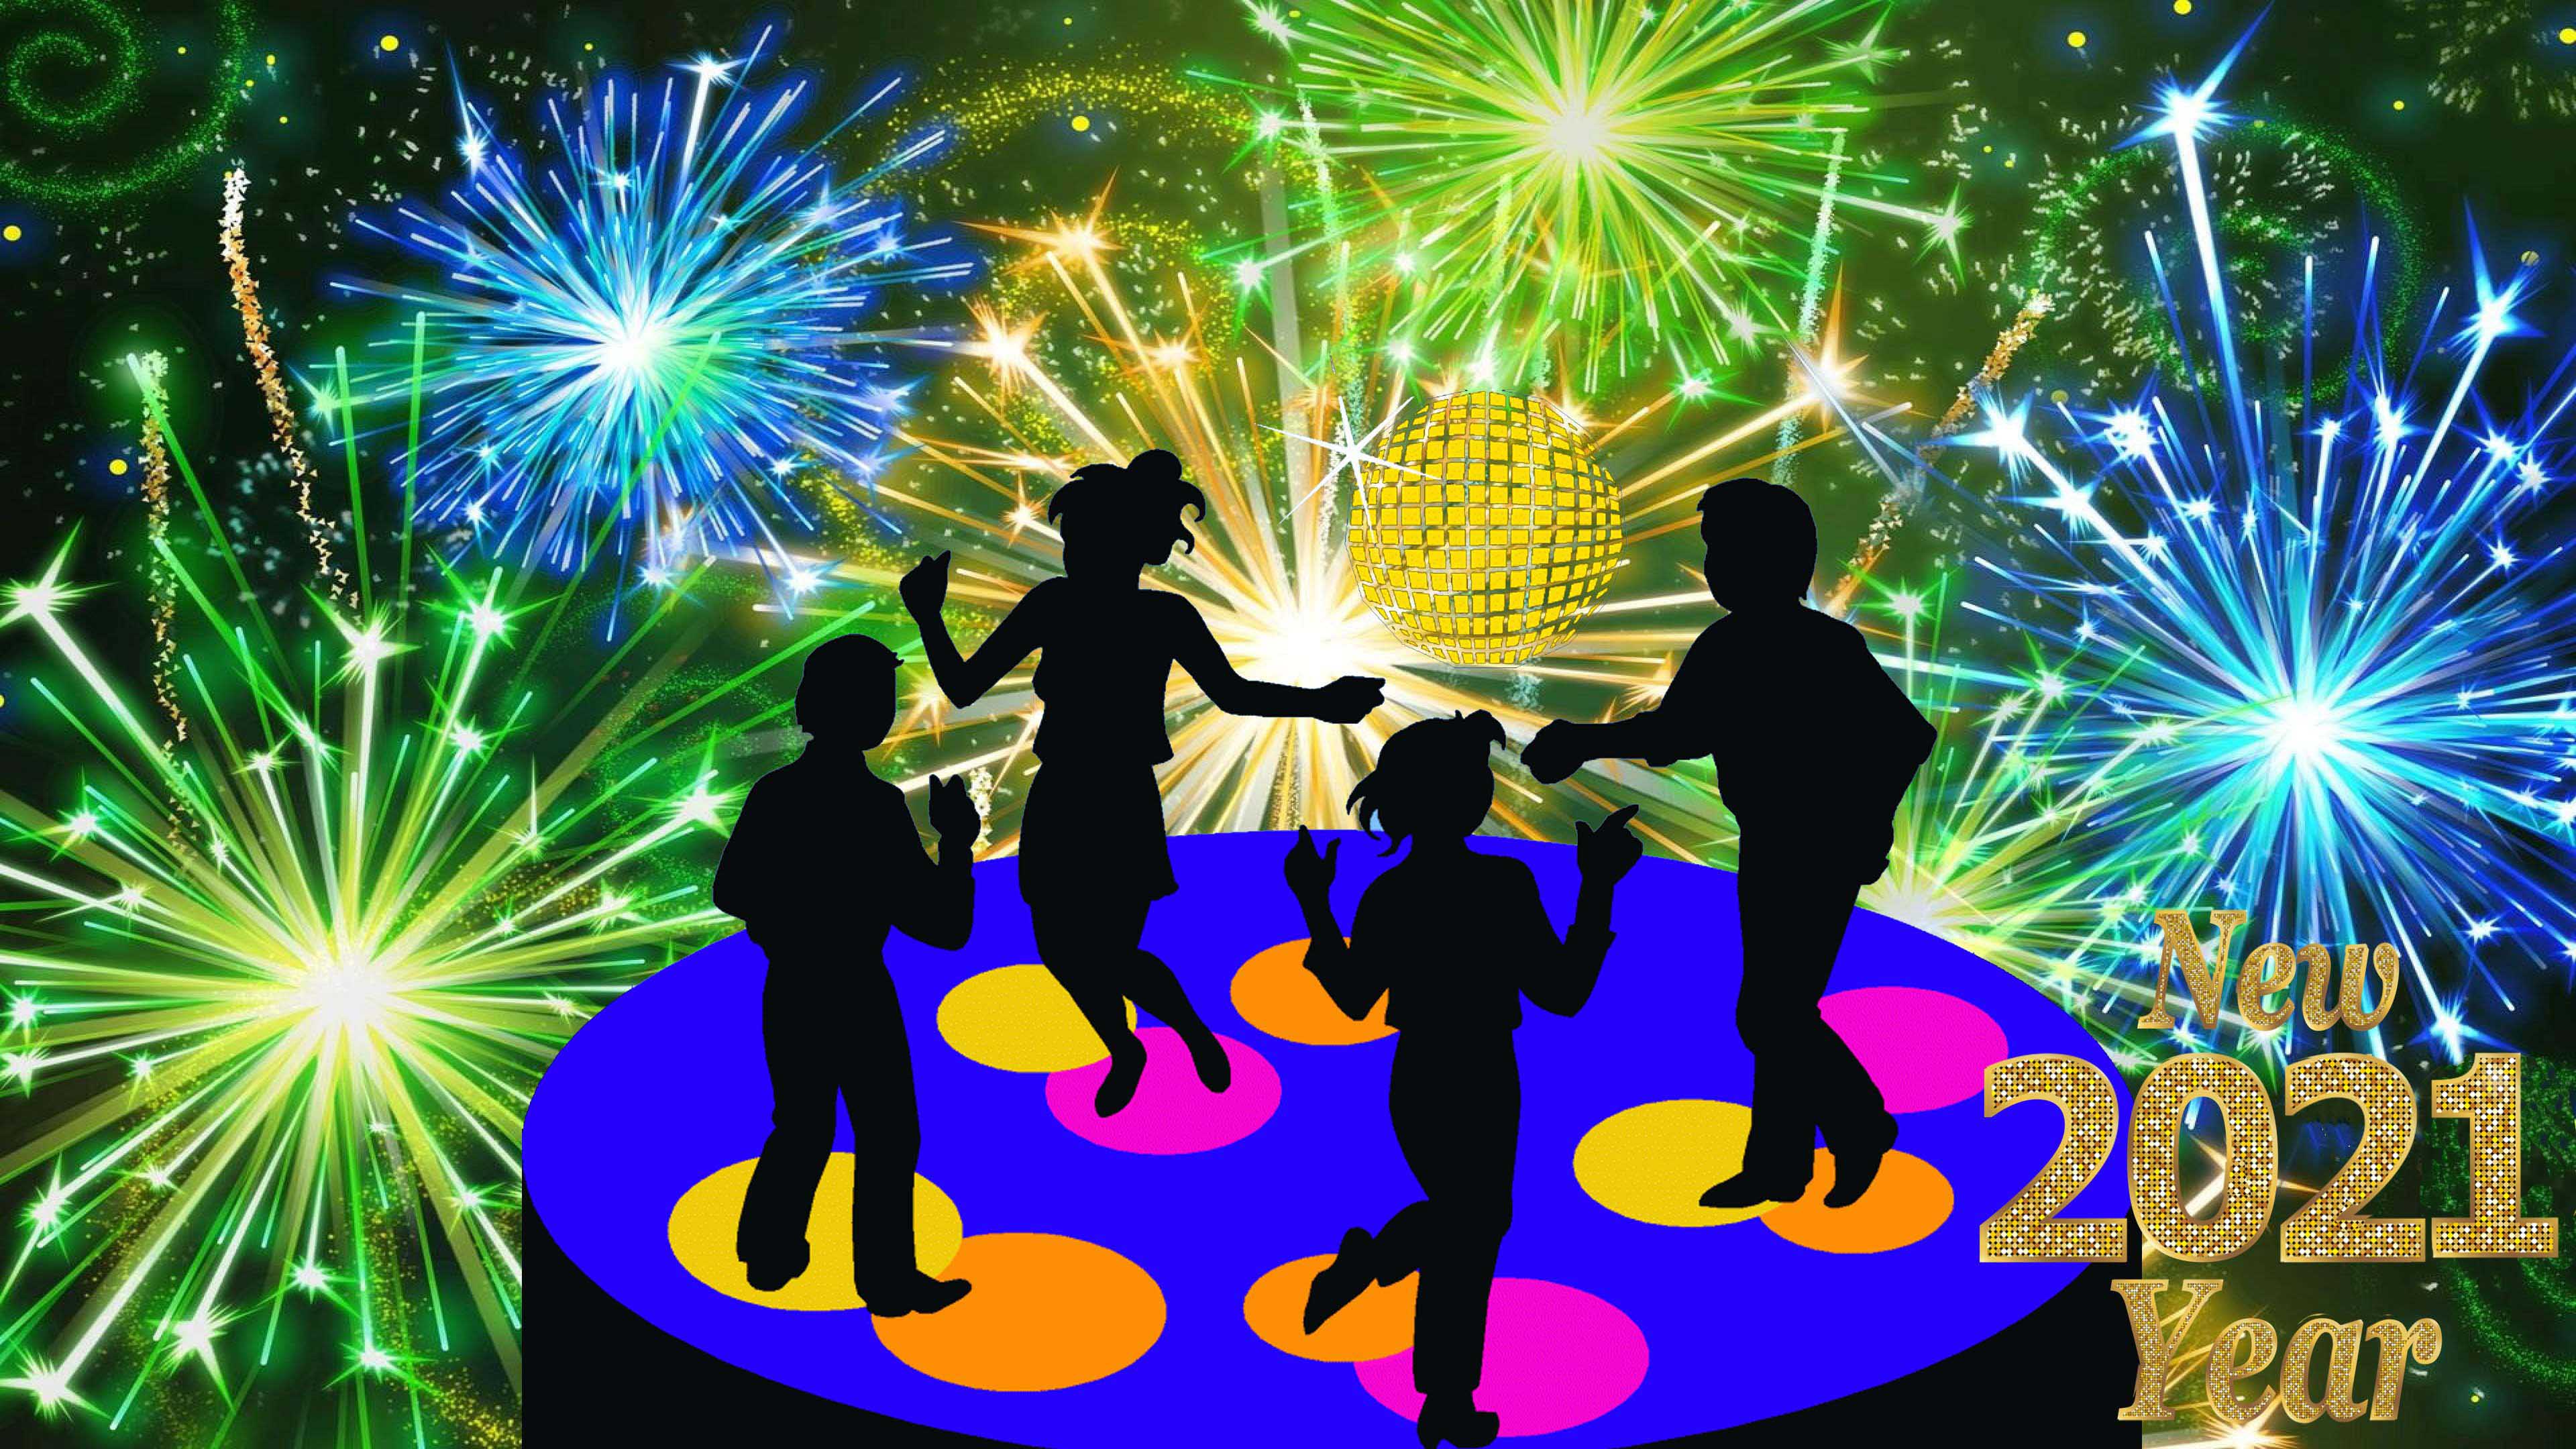 New Year's Eve 2021 Disco Music Dancing Celebration Fireworks Greeting Card New Year HD Wallpaper For Mobile Phones And Computer, Wallpaper13.com